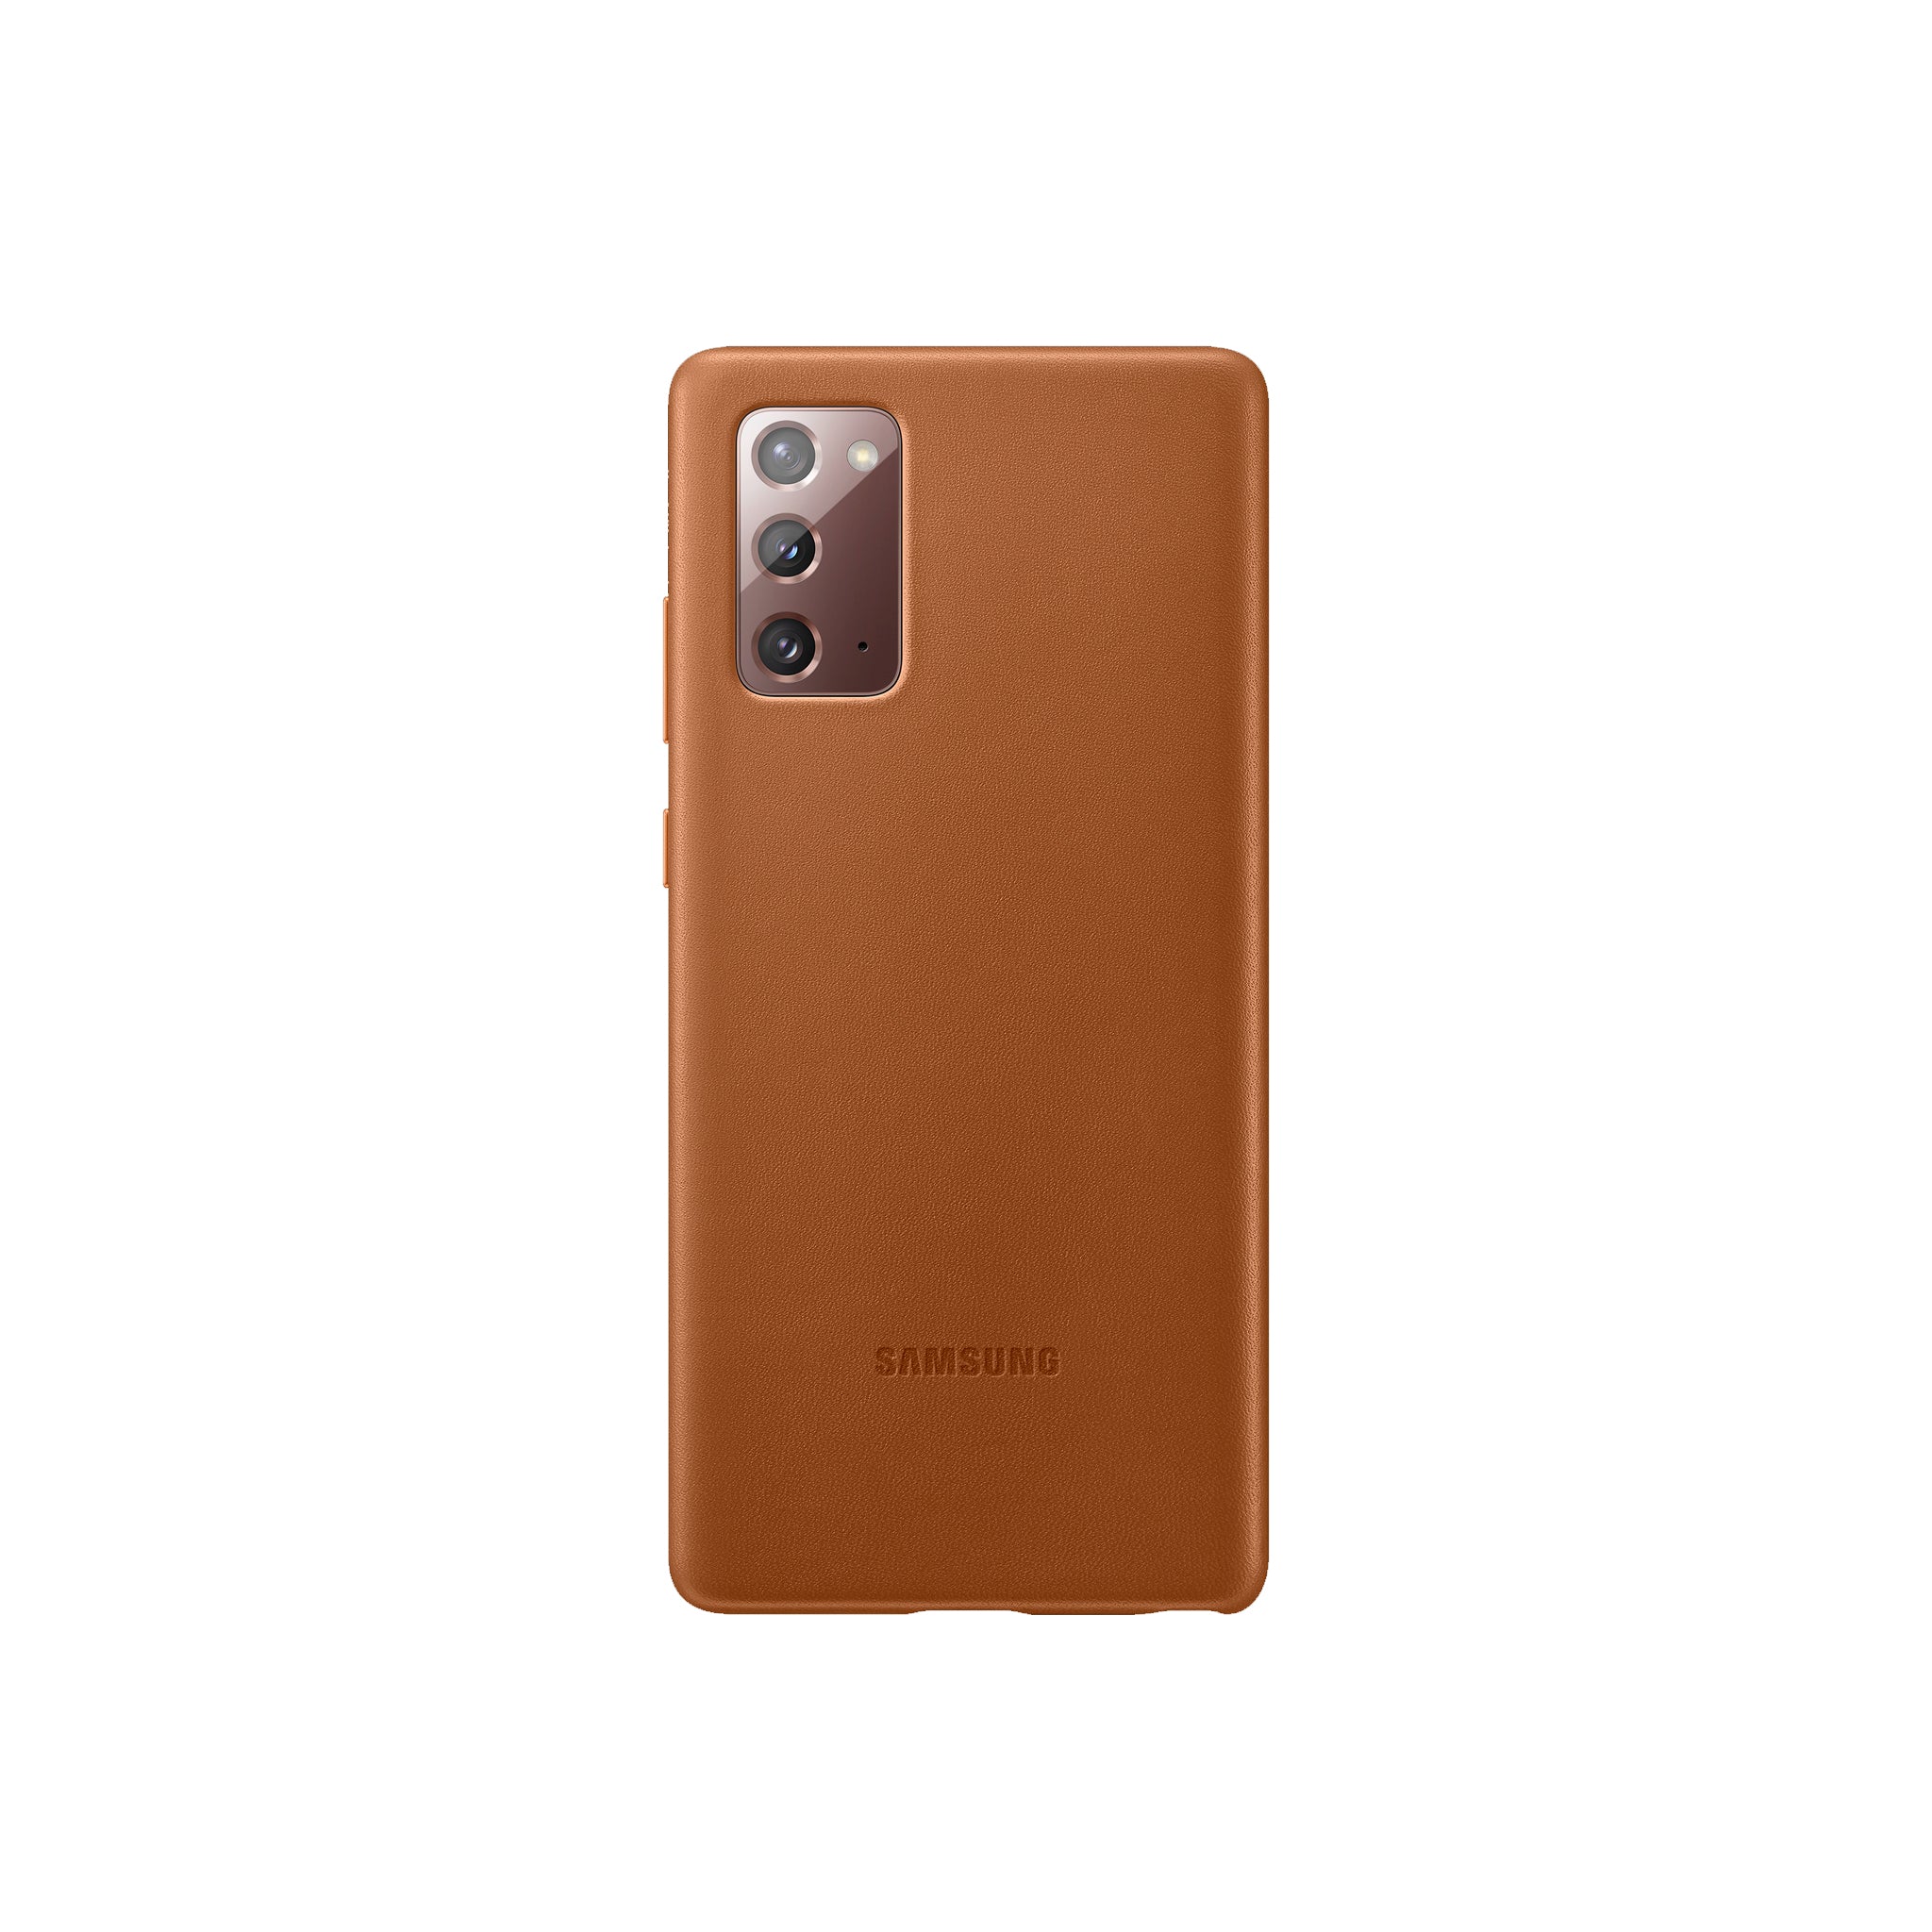 Samsung - Galaxy Note 20 (N980) Silicone Cover - Brown